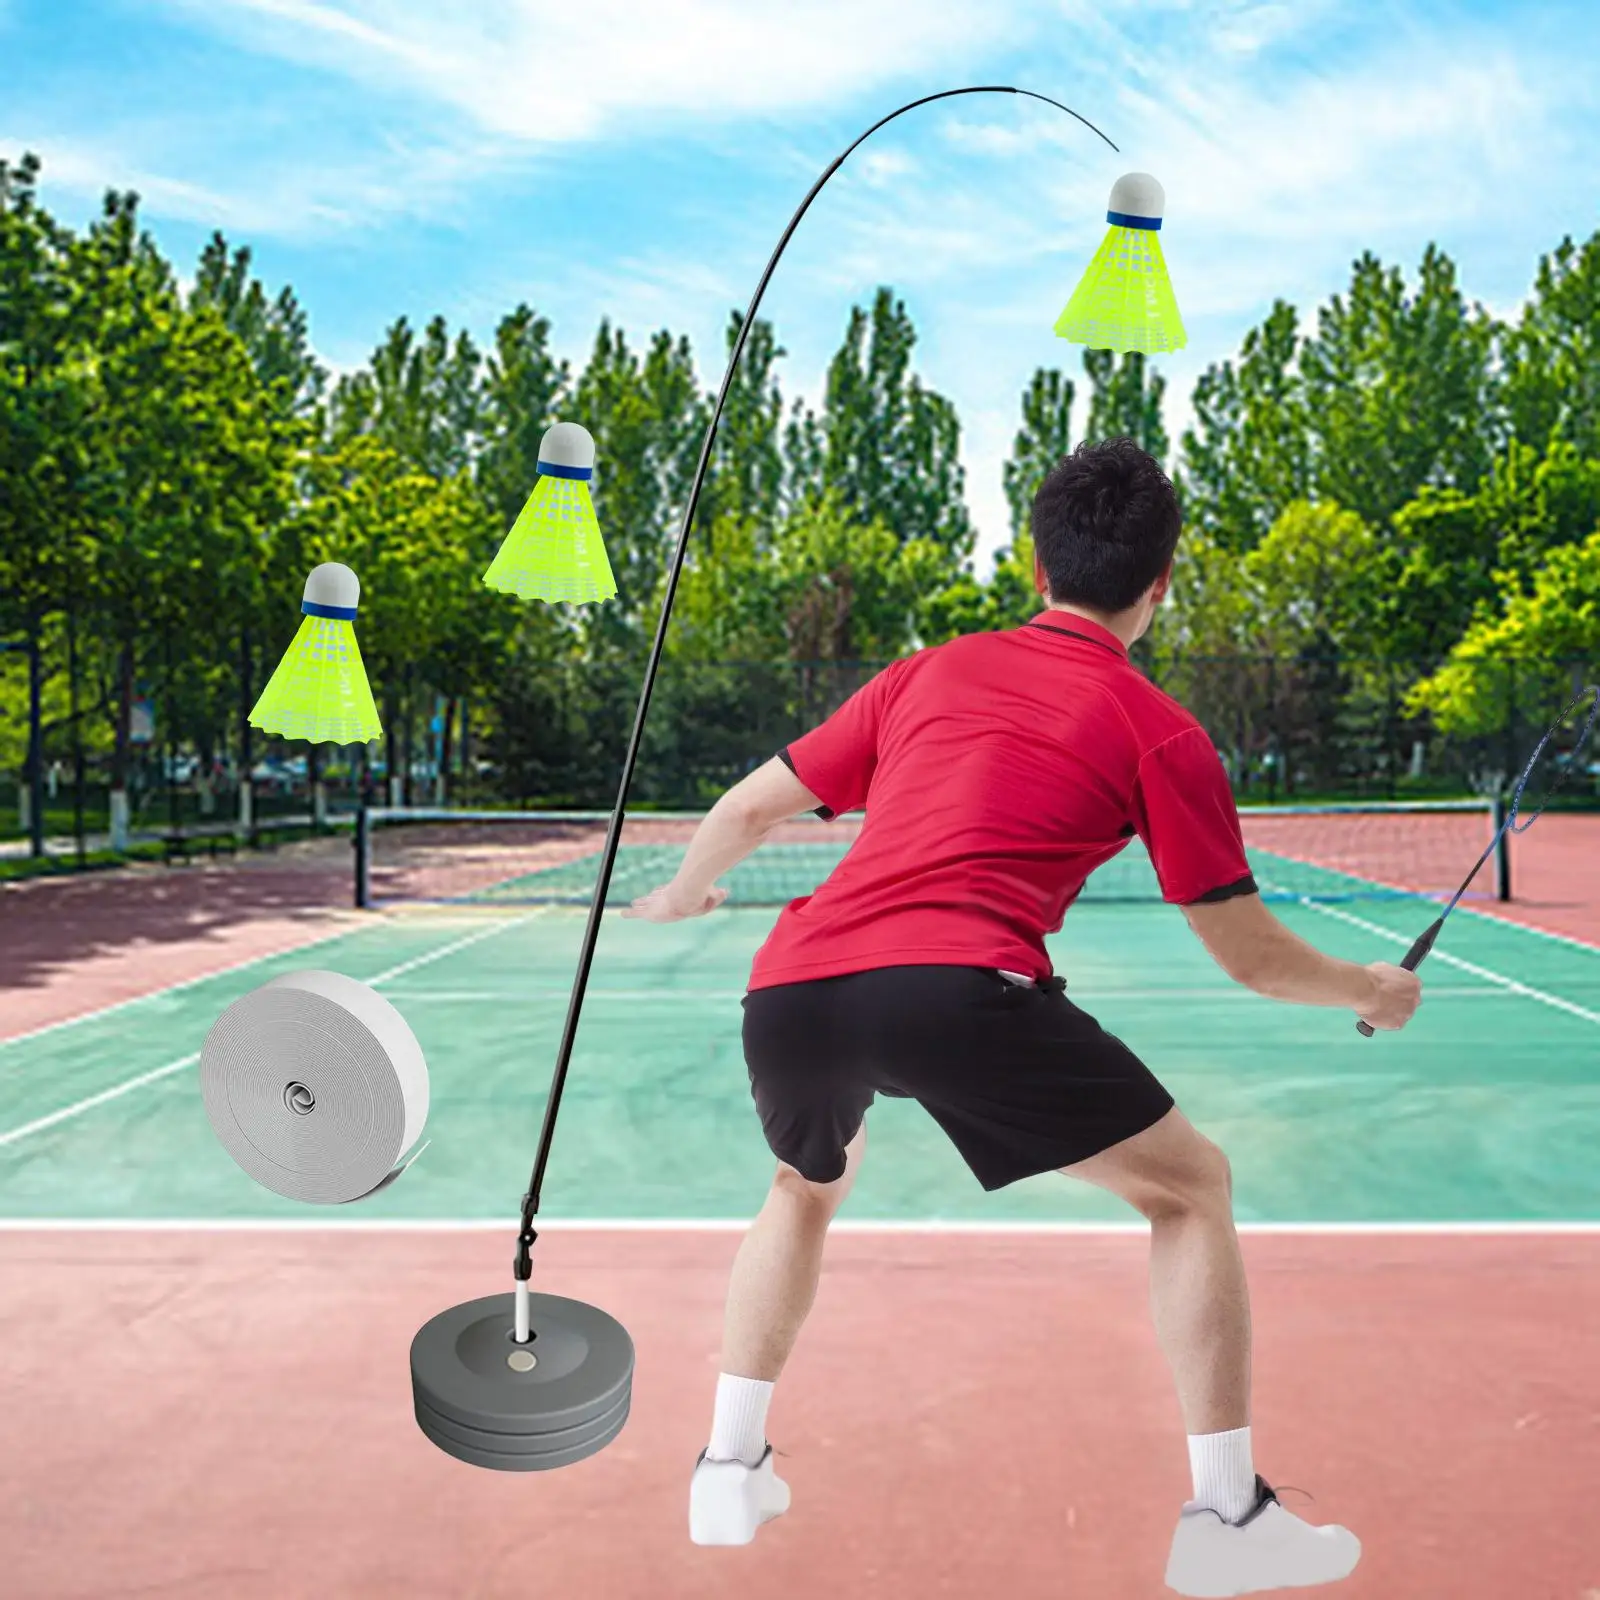 Sports Badminton Solo Exercise Equipment Portable Self Practice Tool for Children Adult Stretchy Playing Alone Train by Yourself